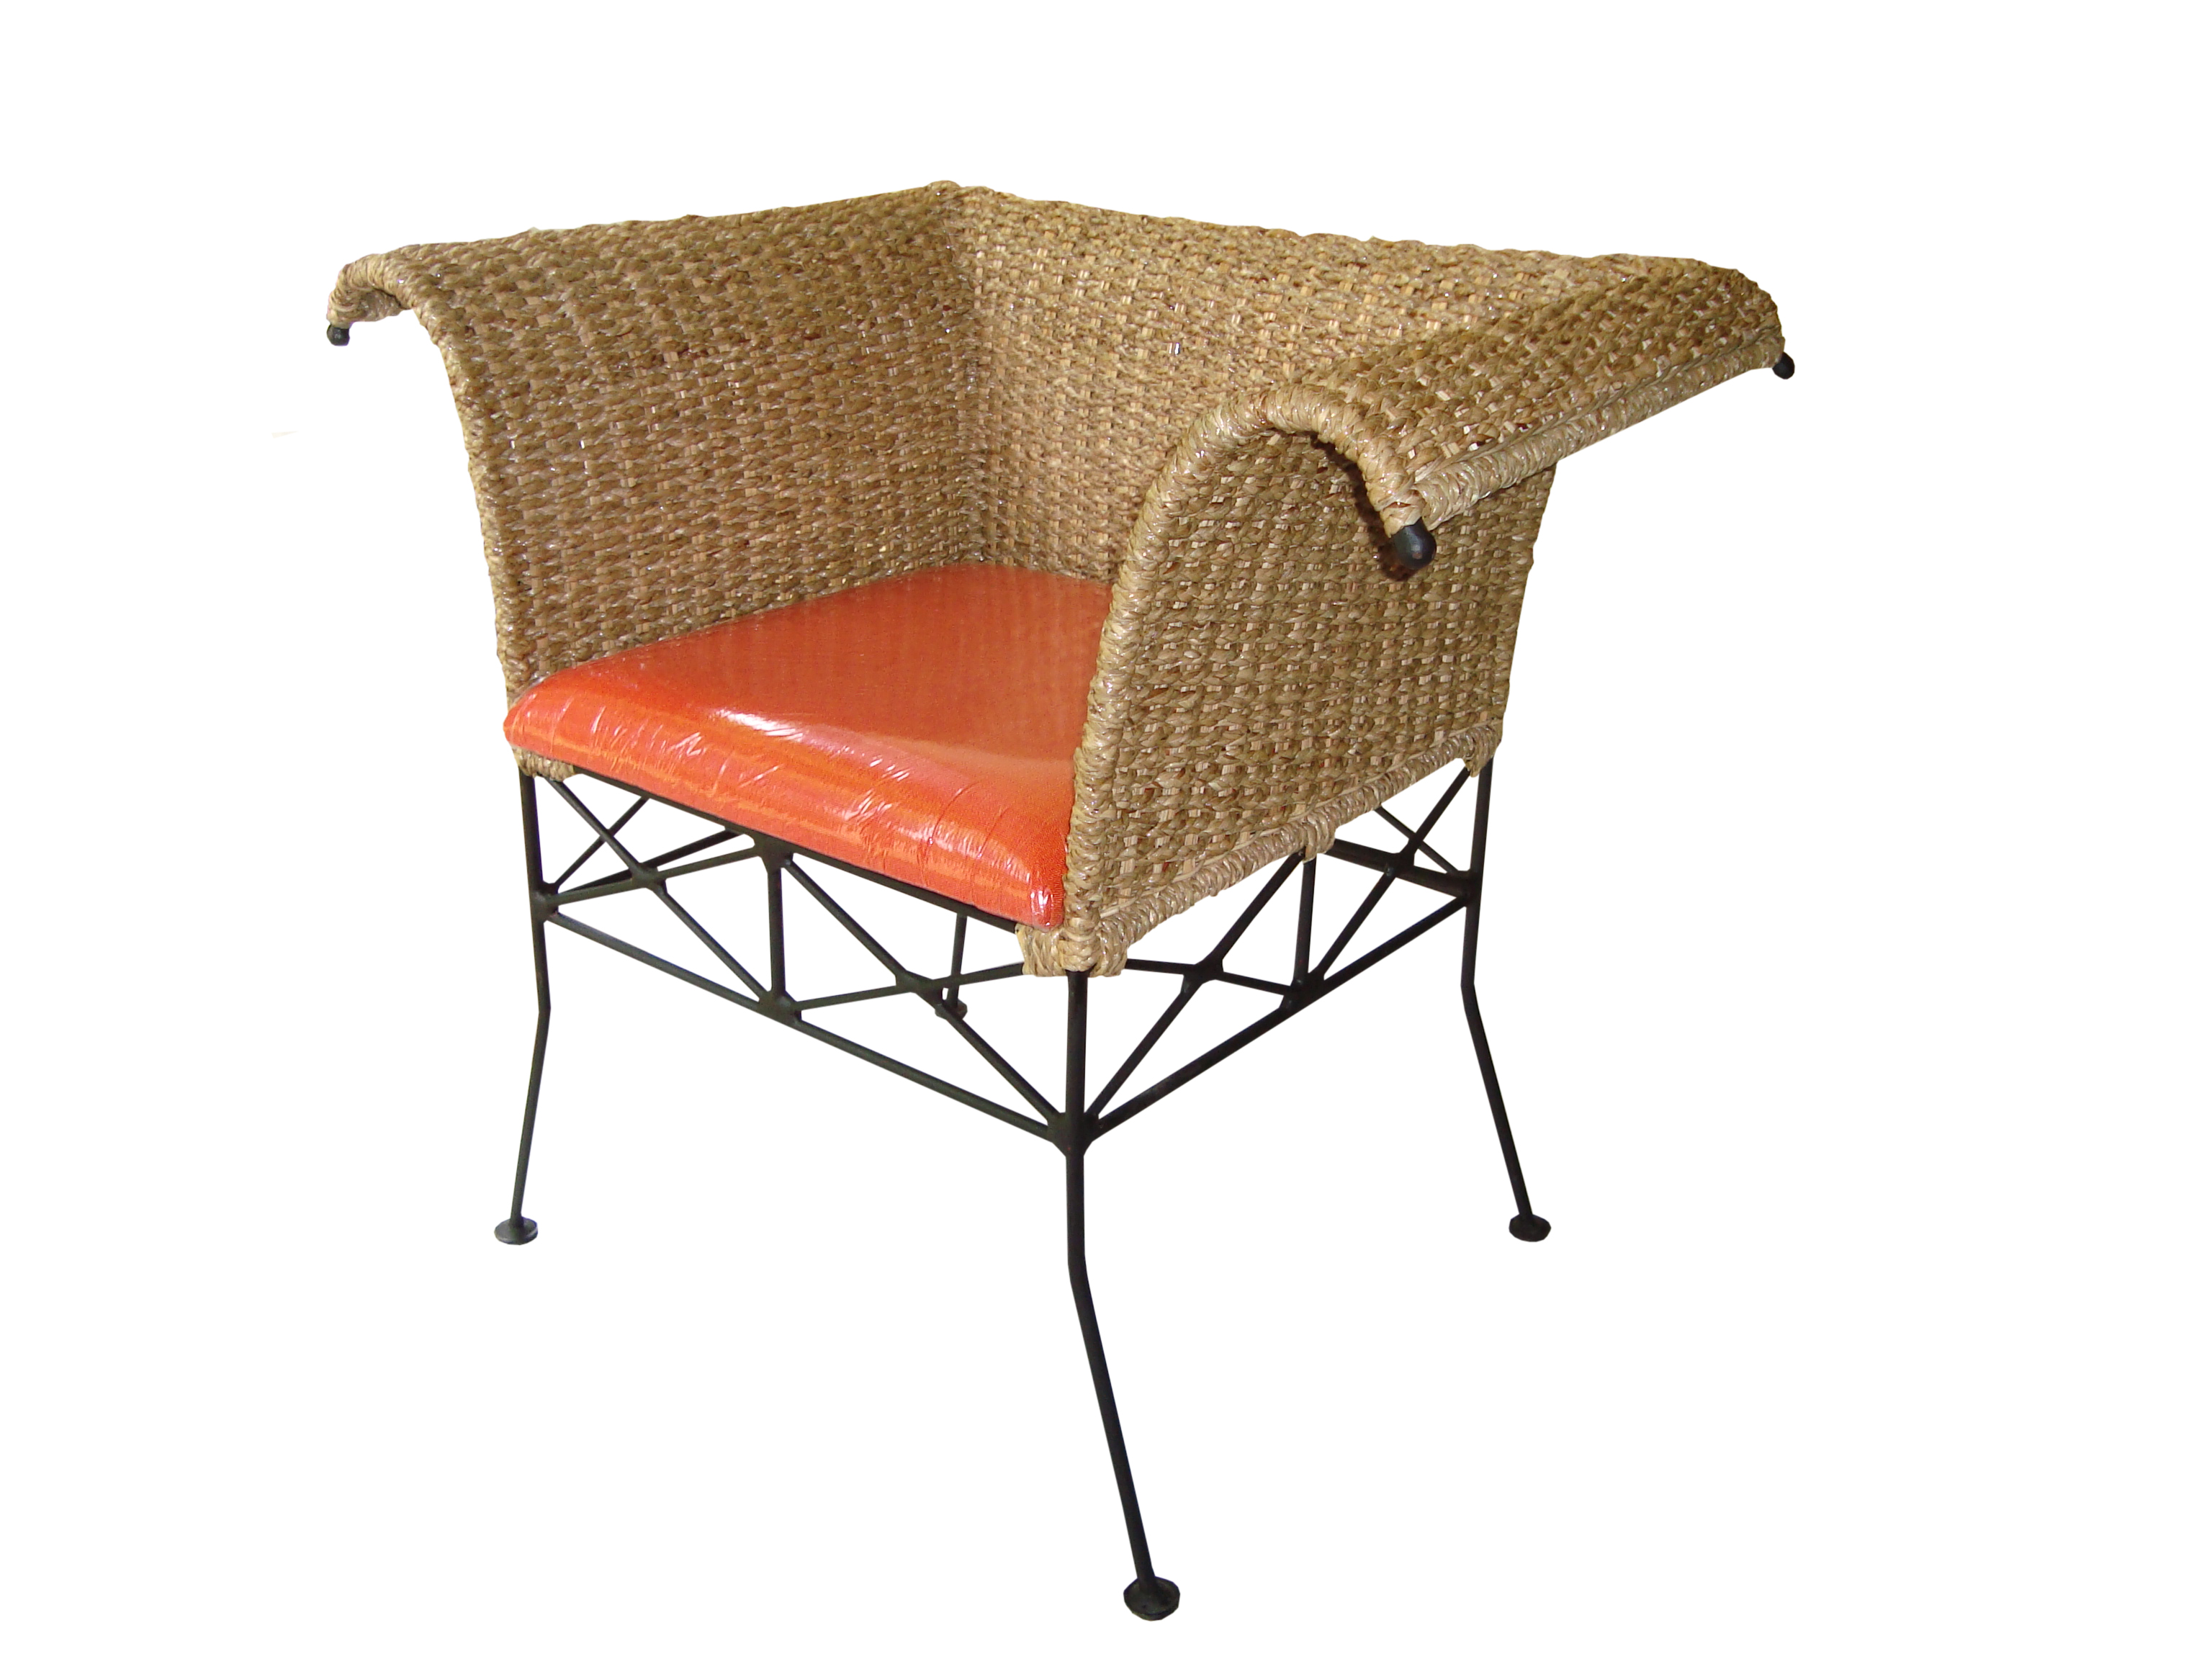 Single seater sofa with an orange cushion made of cane on three sides and wrough iron legs